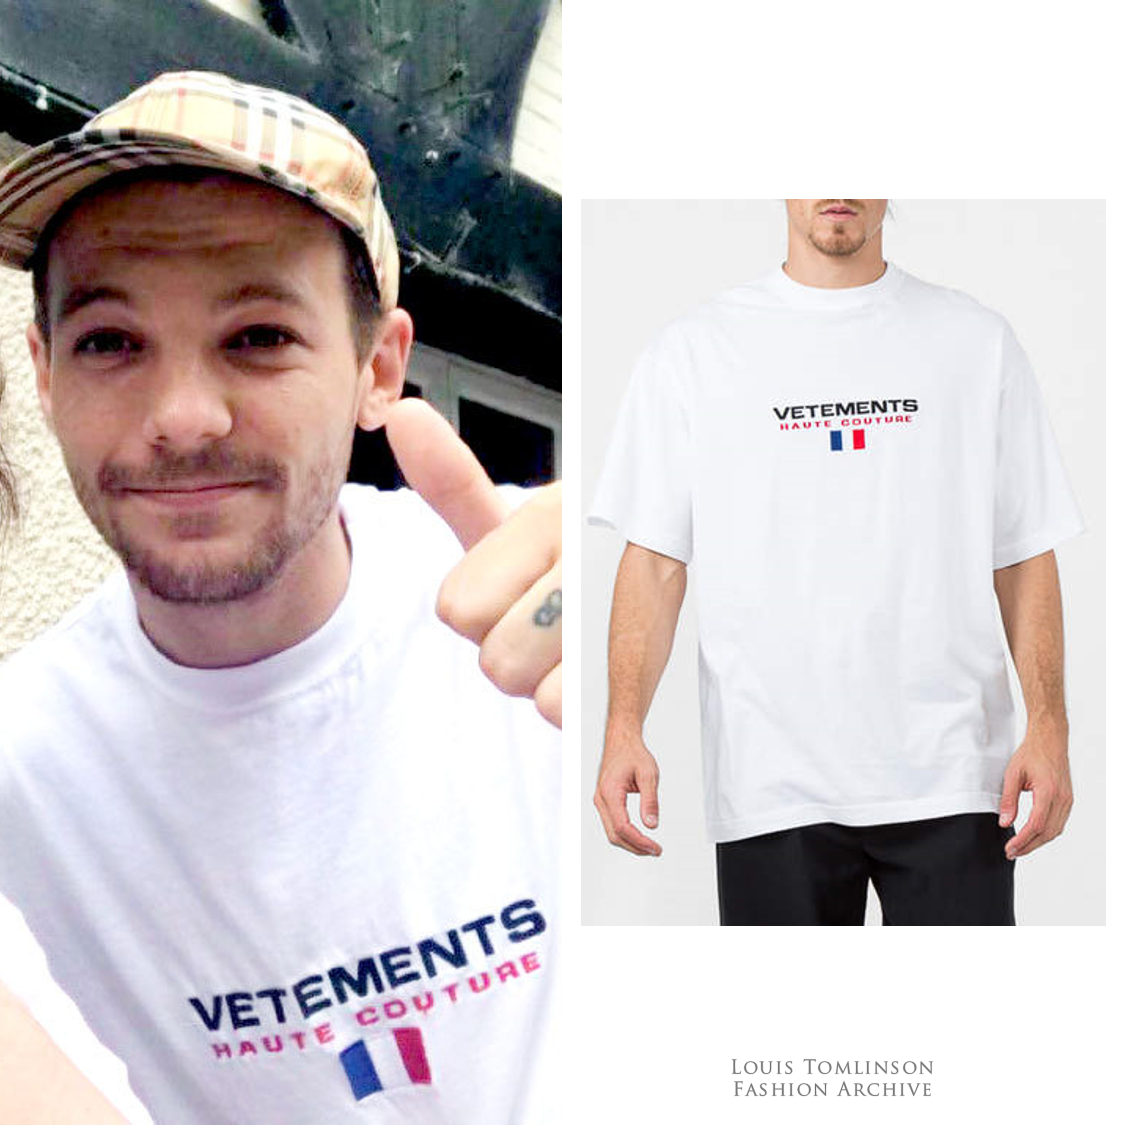 Louis Tomlinson Fashion Archive on X: 07/18/18  Louis wore a @Burberry  short-sleeve vintage check shirt ($345) at #XFactor auditions.    / X